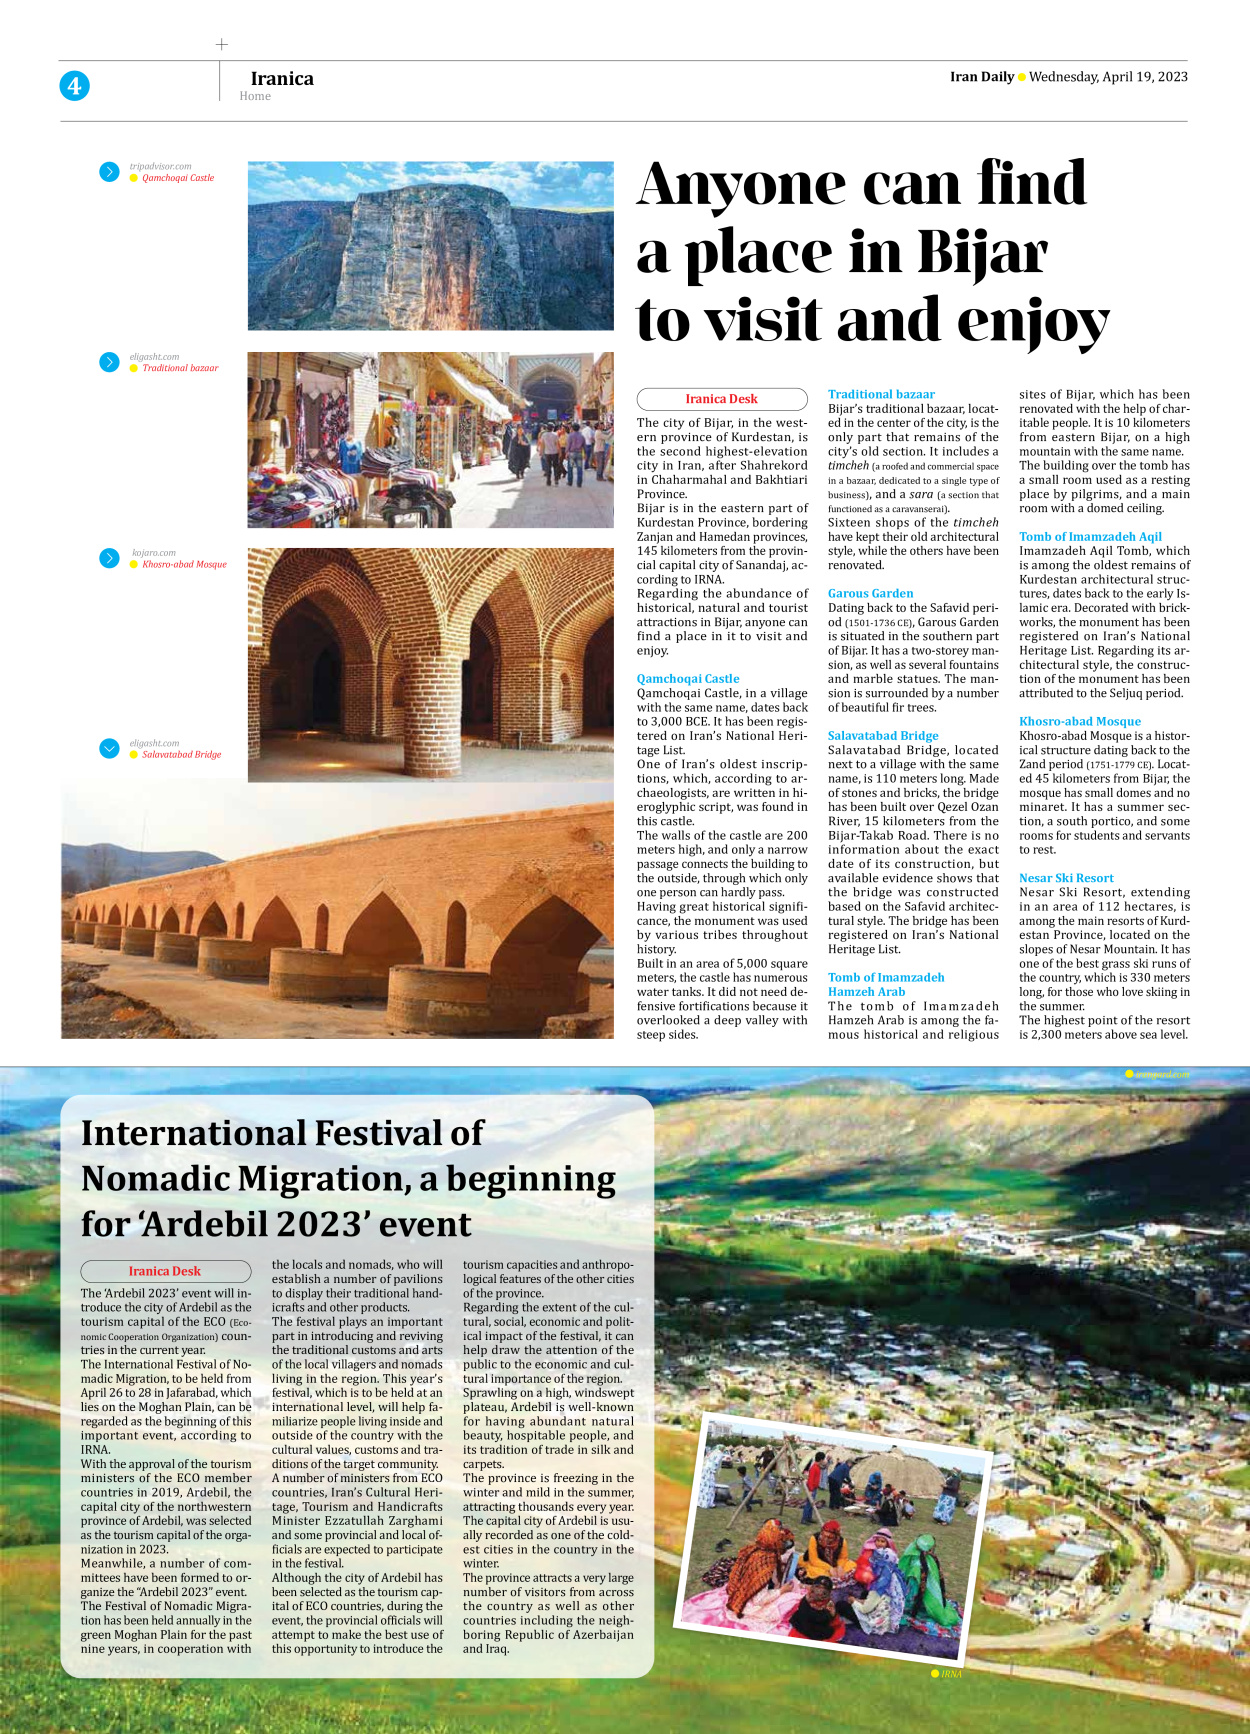 Iran Daily - Number Seven Thousand Two Hundred and Seventy Two - 19 April 2023 - Page 4